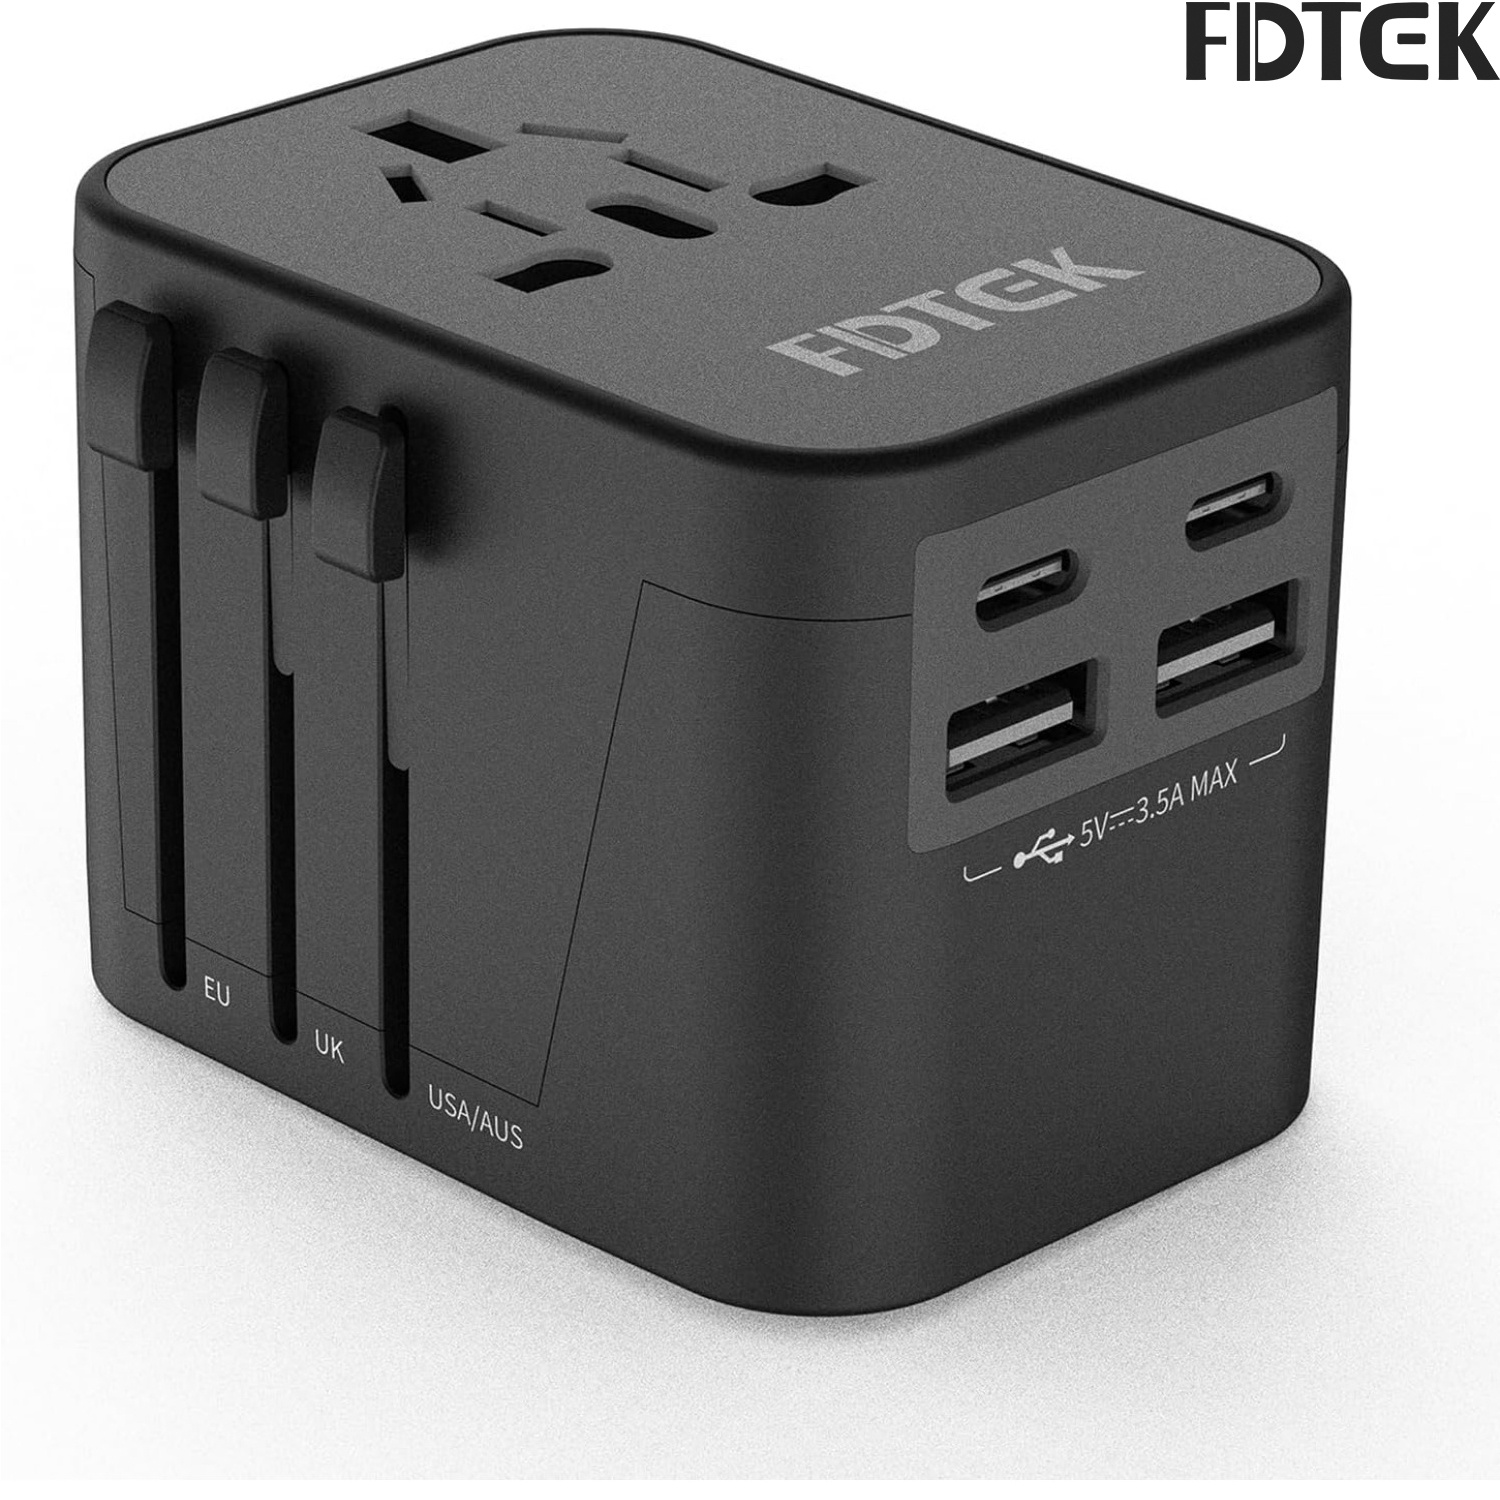 

Universal Travel Adapter, International Universal Adapter European Travel Plug Adapter With 4 Usb Ports (2 Usb C) All-in-one Worldwide Adapter For Europe Uk Aus Asia Japan Covers 300+countries